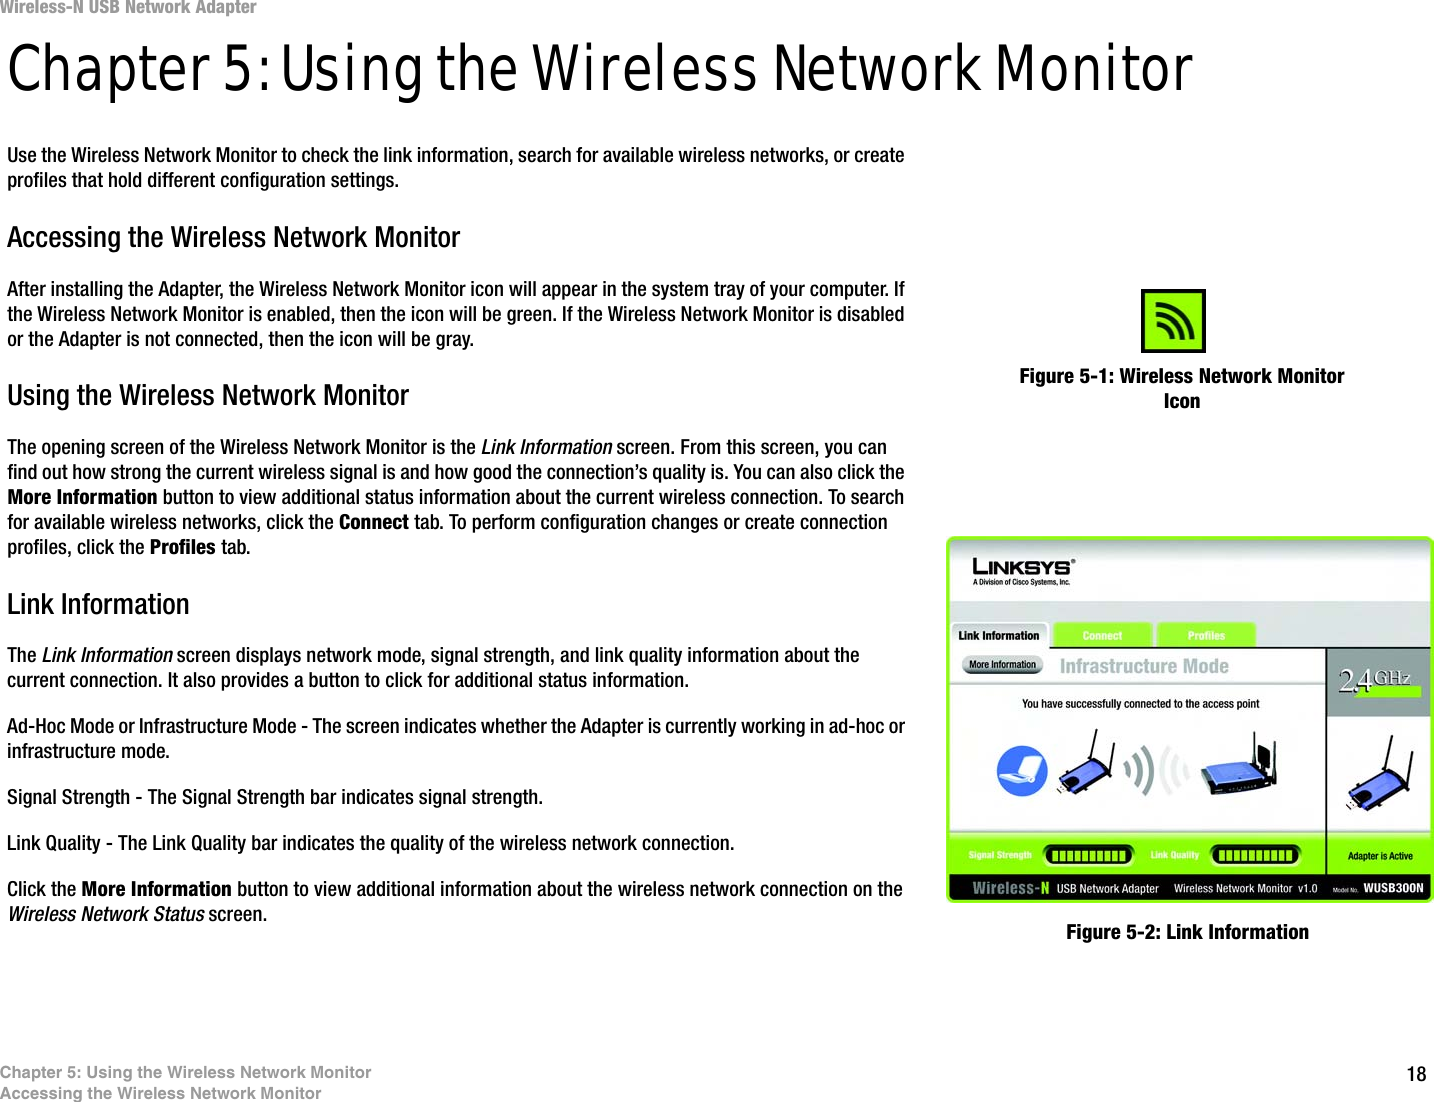 18Chapter 5: Using the Wireless Network MonitorAccessing the Wireless Network MonitorWireless-N USB Network AdapterChapter 5: Using the Wireless Network MonitorUse the Wireless Network Monitor to check the link information, search for available wireless networks, or create profiles that hold different configuration settings.Accessing the Wireless Network MonitorAfter installing the Adapter, the Wireless Network Monitor icon will appear in the system tray of your computer. If the Wireless Network Monitor is enabled, then the icon will be green. If the Wireless Network Monitor is disabled or the Adapter is not connected, then the icon will be gray.Using the Wireless Network MonitorThe opening screen of the Wireless Network Monitor is the Link Information screen. From this screen, you can find out how strong the current wireless signal is and how good the connection’s quality is. You can also click the More Information button to view additional status information about the current wireless connection. To search for available wireless networks, click the Connect tab. To perform configuration changes or create connection profiles, click the Profiles tab.Link InformationThe Link Information screen displays network mode, signal strength, and link quality information about the current connection. It also provides a button to click for additional status information.Ad-Hoc Mode or Infrastructure Mode - The screen indicates whether the Adapter is currently working in ad-hoc or infrastructure mode.Signal Strength - The Signal Strength bar indicates signal strength. Link Quality - The Link Quality bar indicates the quality of the wireless network connection.Click the More Information button to view additional information about the wireless network connection on the Wireless Network Status screen.Figure 5-1: Wireless Network Monitor IconFigure 5-2: Link Information